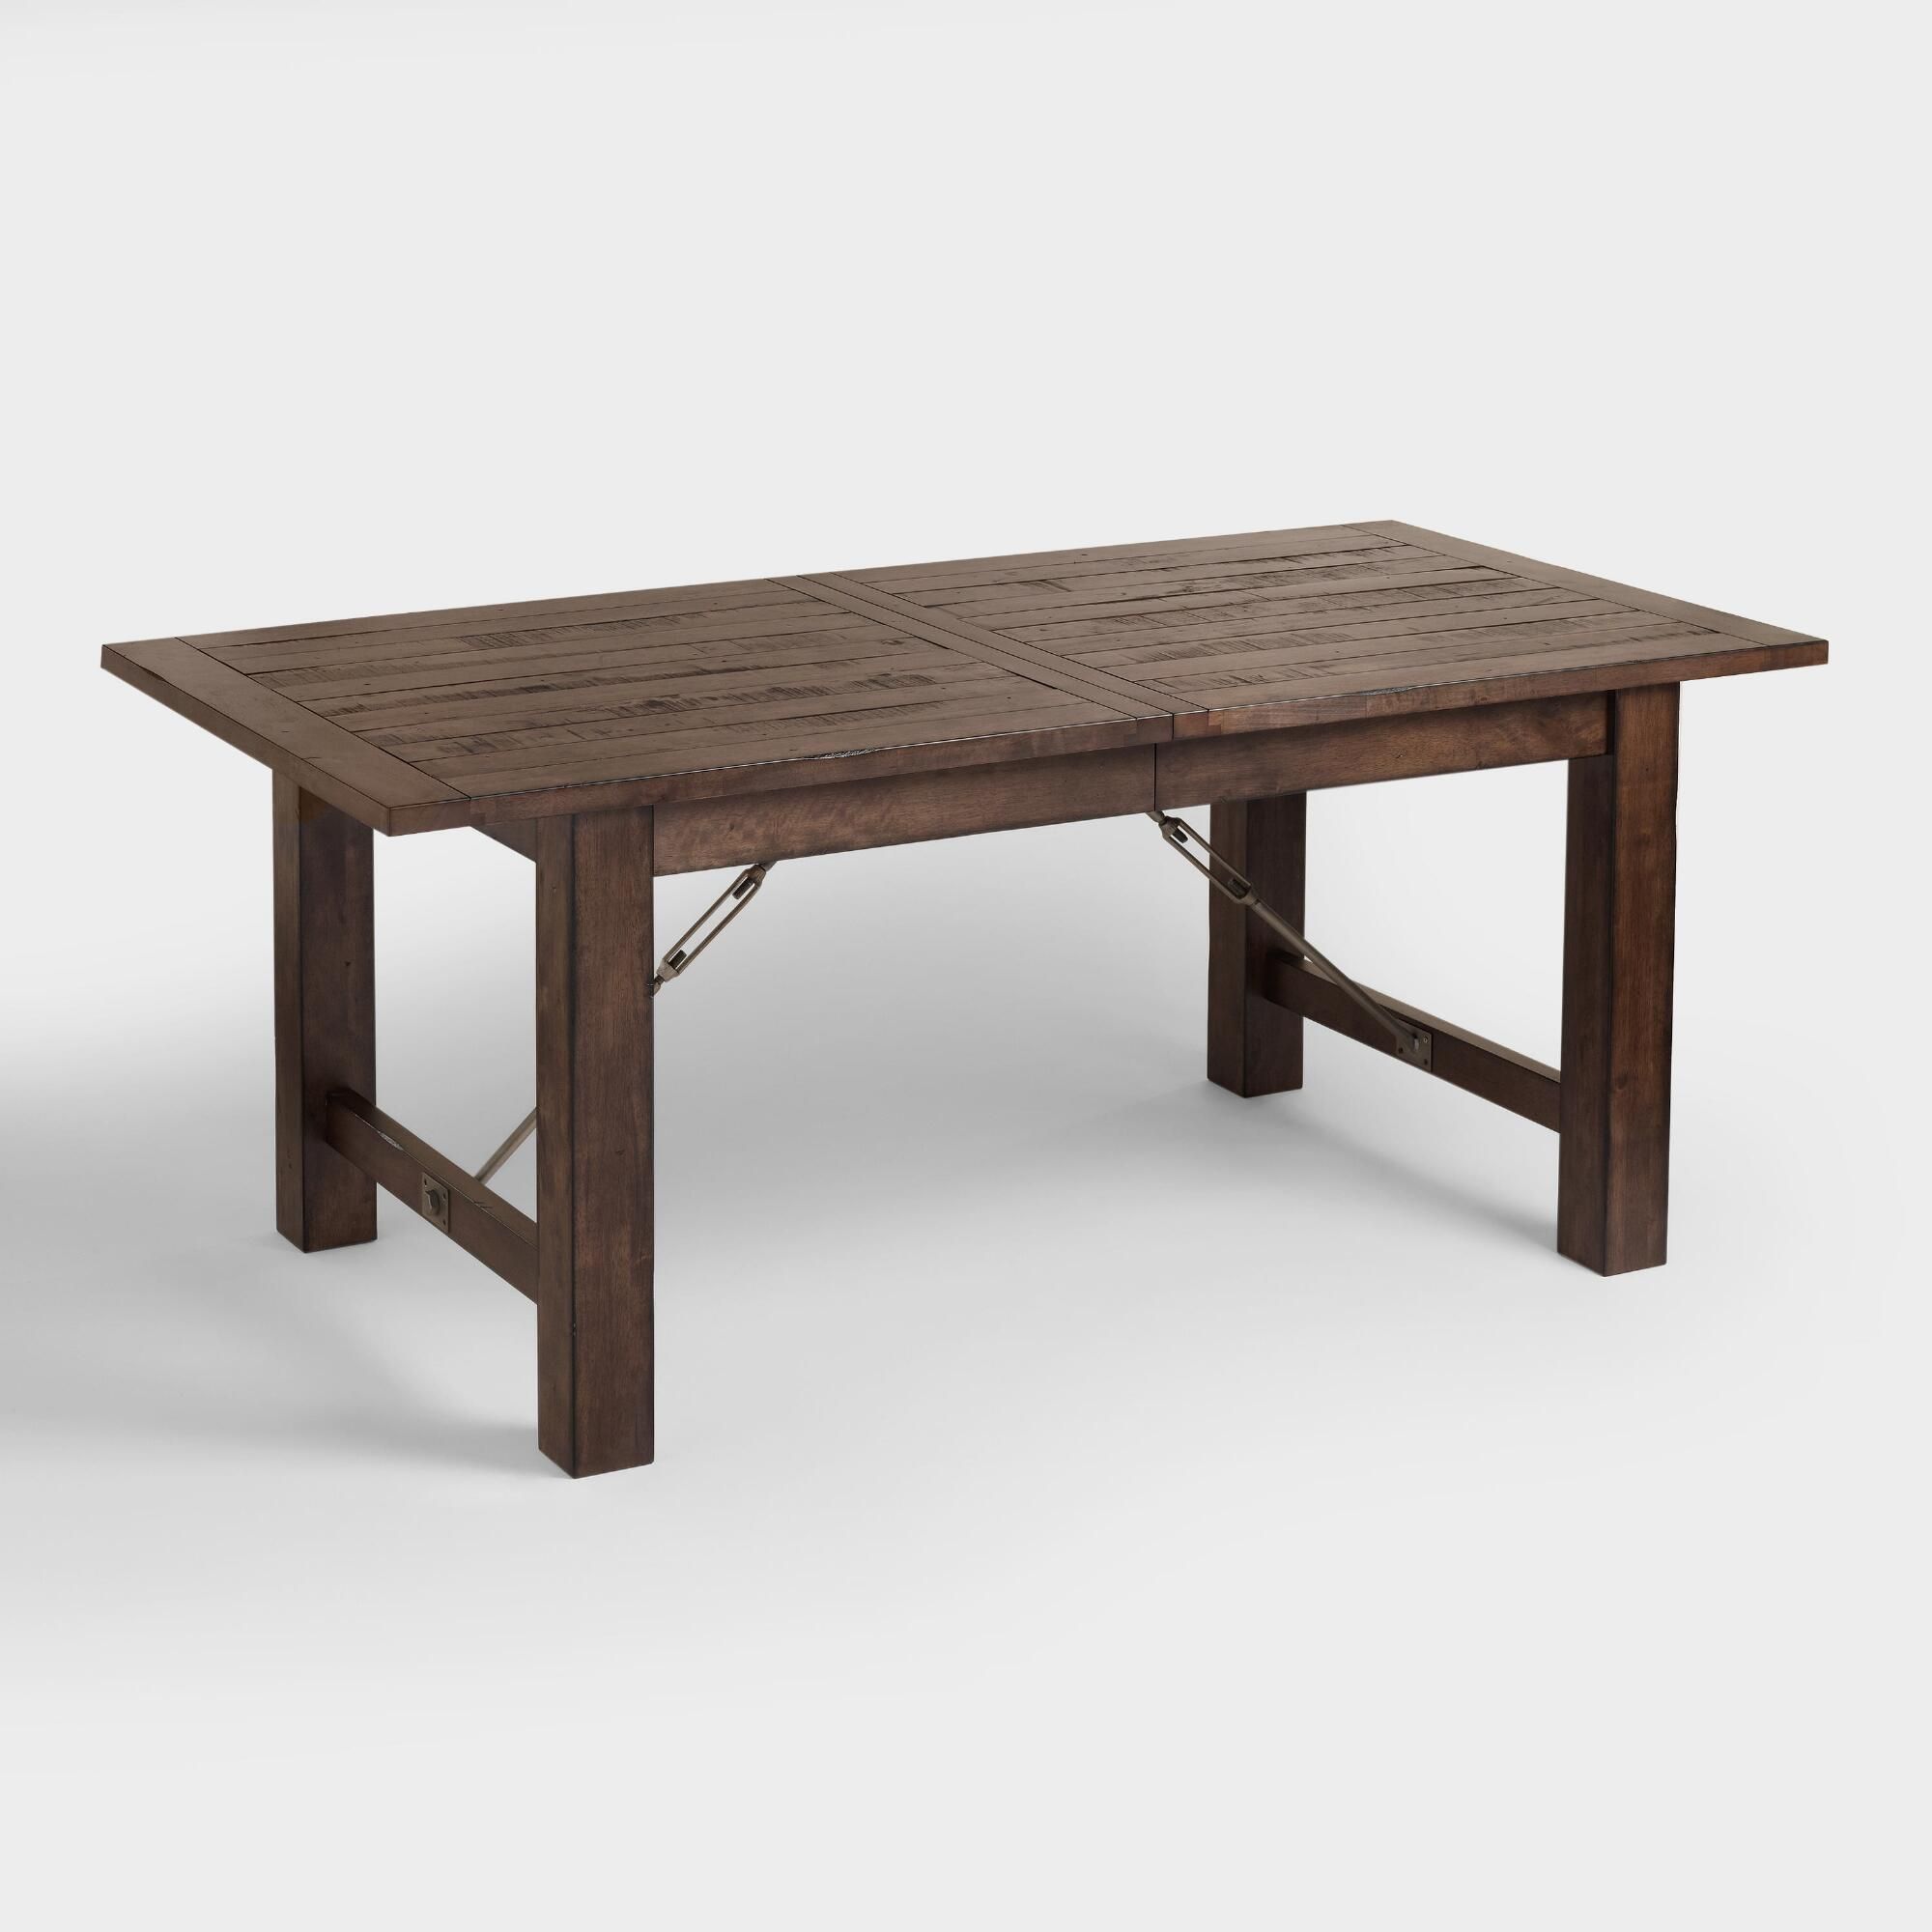 Wood Garner Extension Dining Table: Brownworld Market In With Best And Newest Gray Wash Toscana Extending Dining Tables (View 9 of 25)